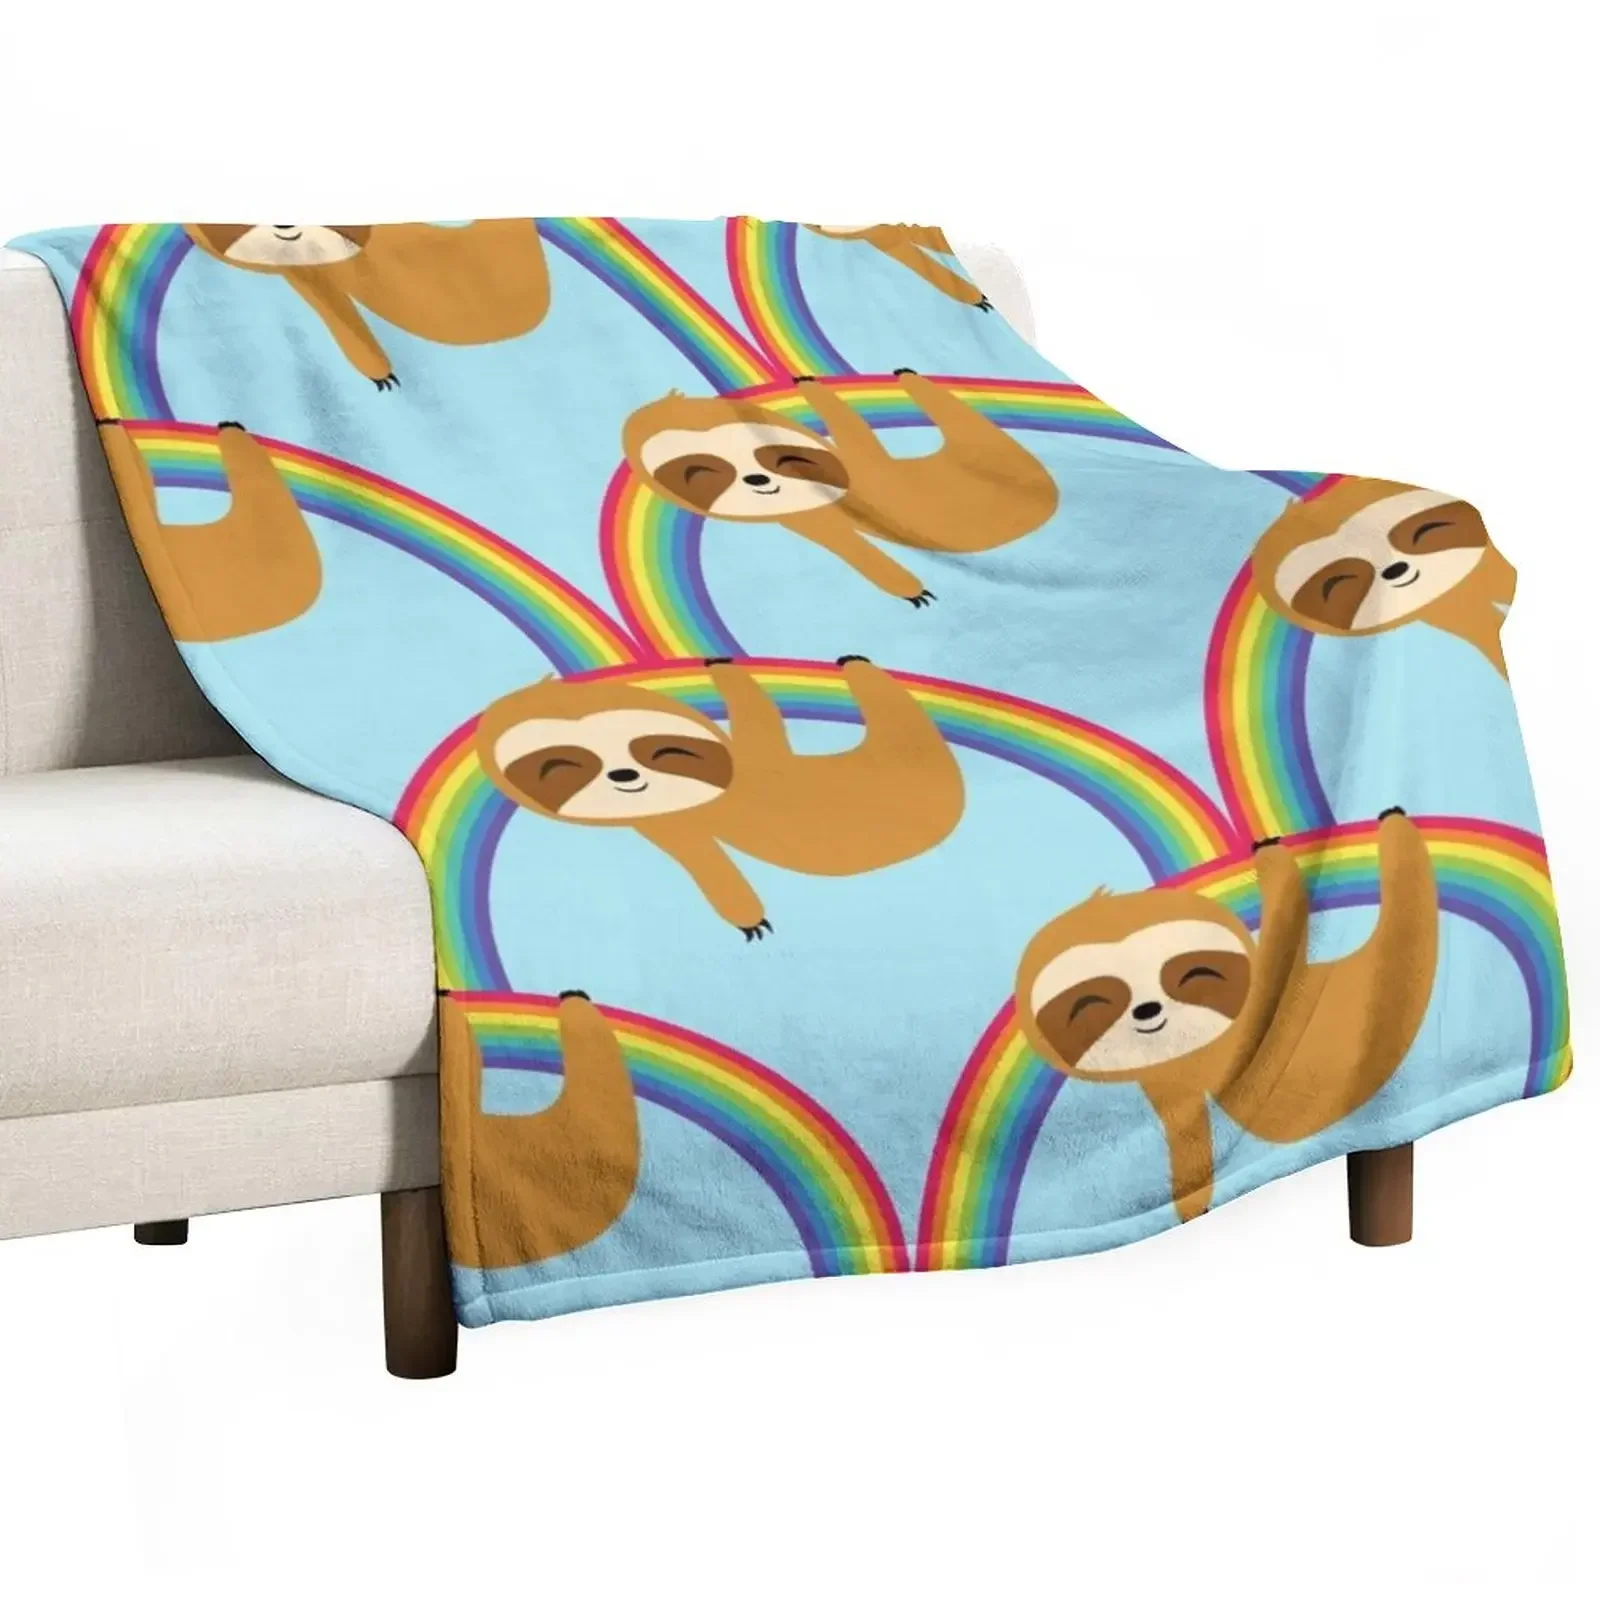 

Sloth on Rainbow, Cute Sloth Hangign on Rainbow, Take it Slow Throw Blanket For Baby blankets ands Summer Beddings Blankets